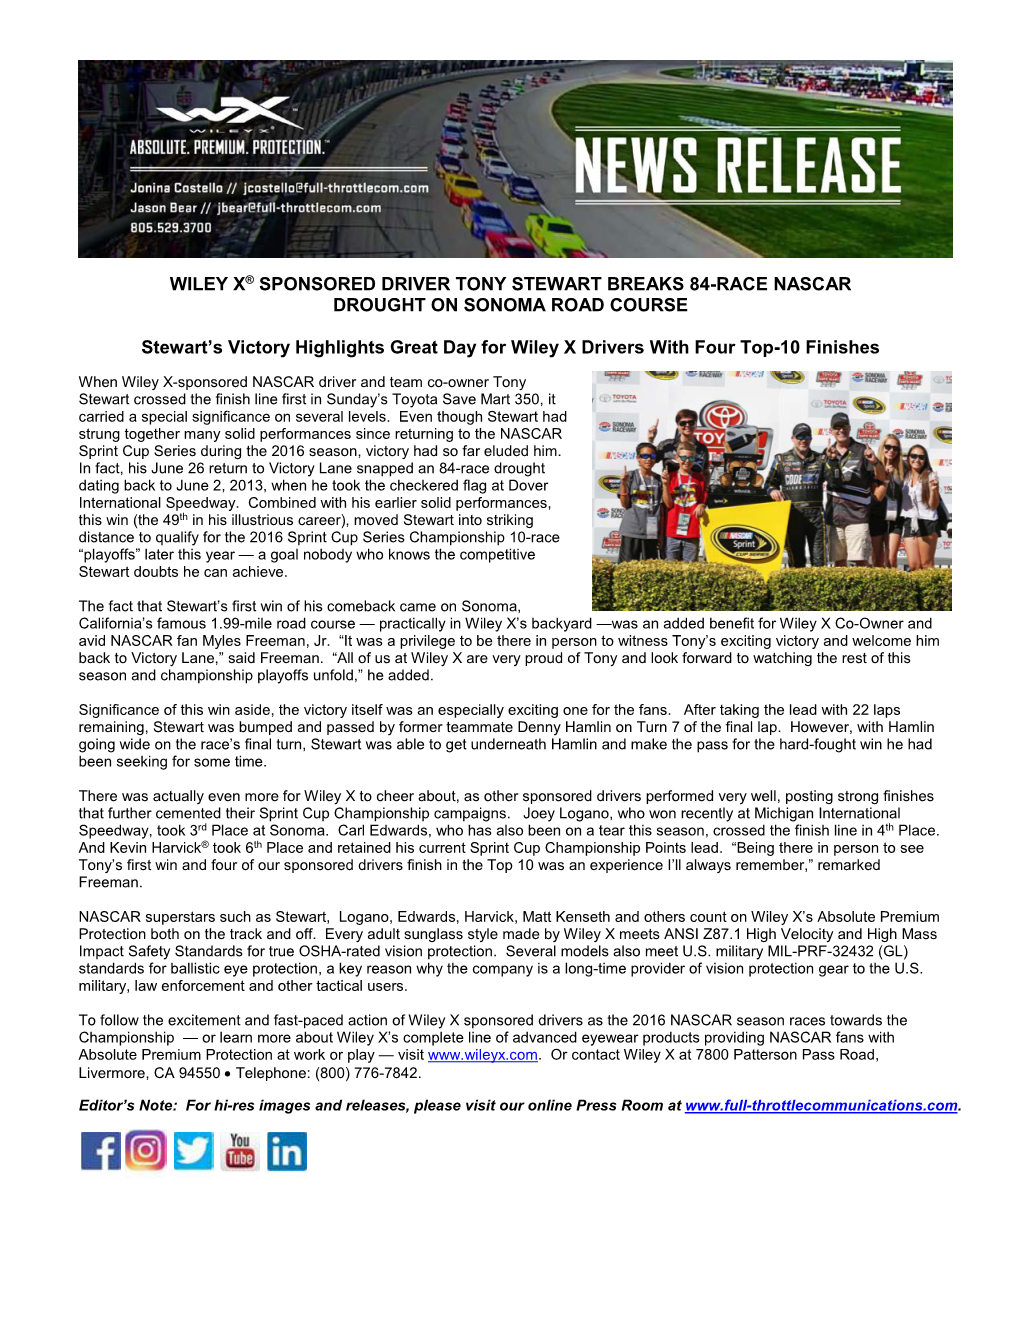 Wiley X® Sponsored Driver Tony Stewart Breaks 84-Race Nascar Drought on Sonoma Road Course